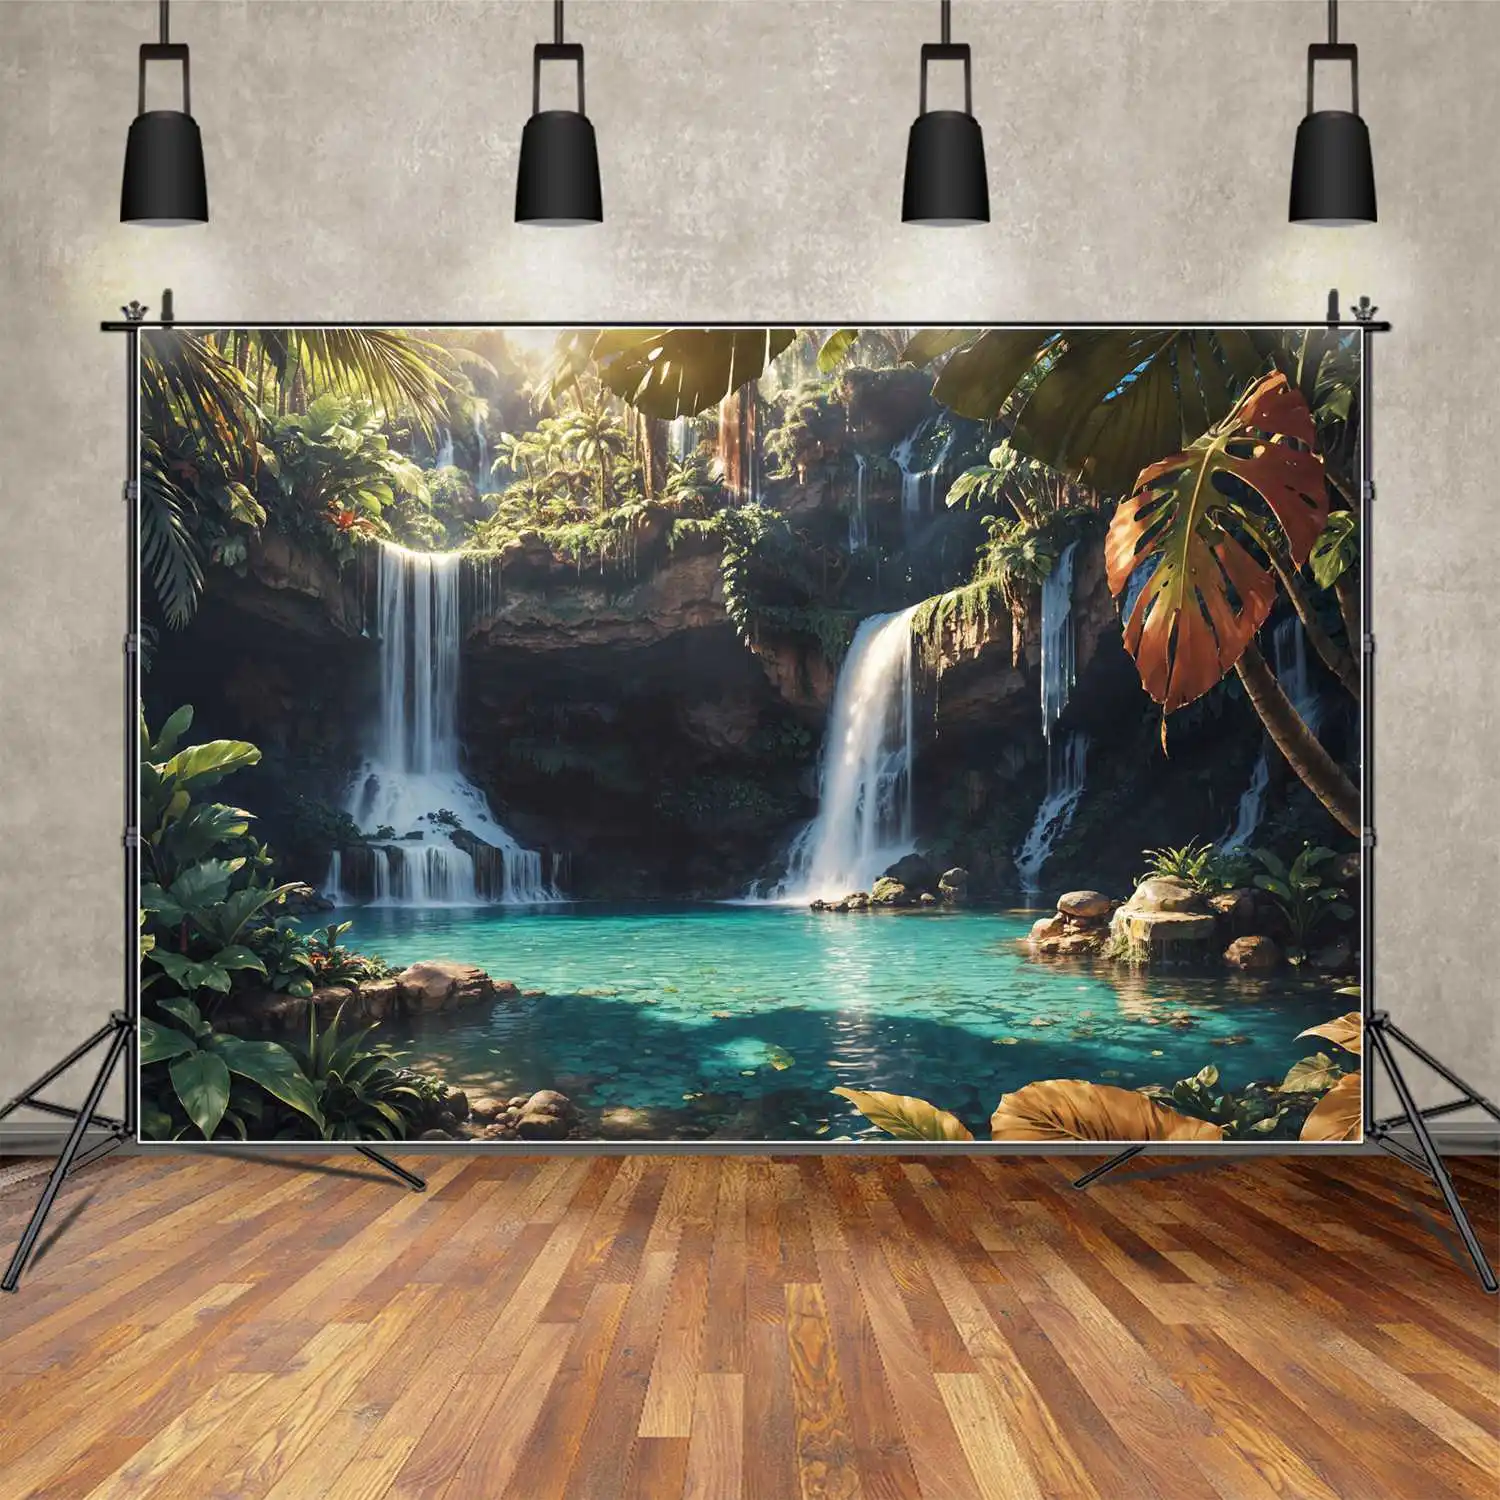 

Summer Mountains Waterfall Backdrops Photography Decor Tropical Customized Baby Photo Booth Photographic Backgrounds